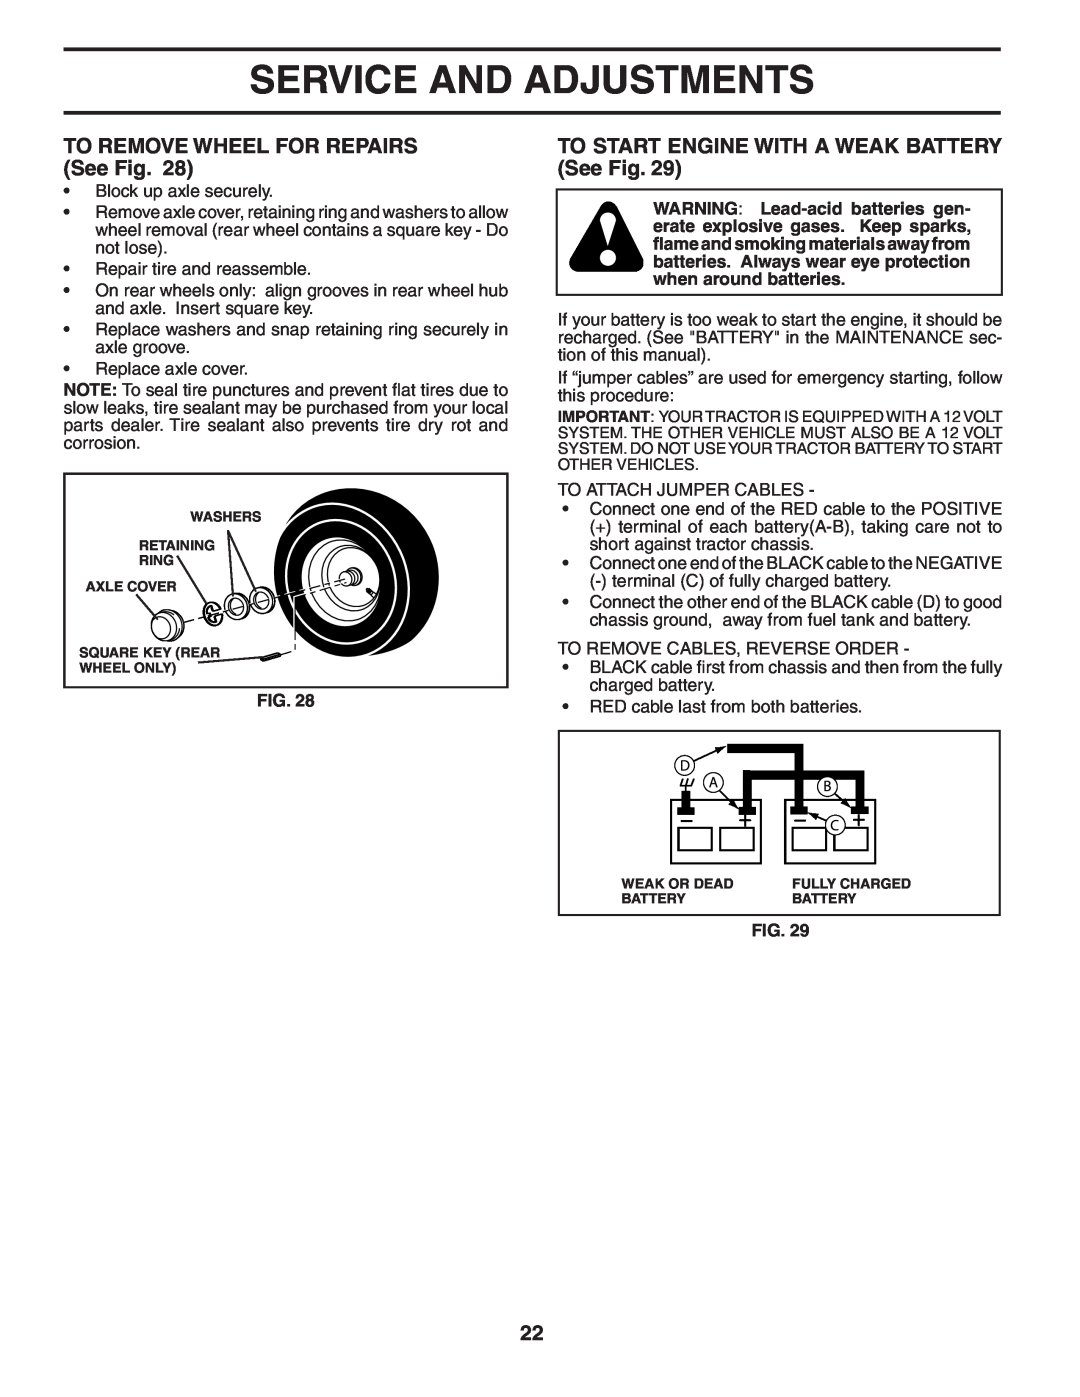 Poulan 404655 TO REMOVE WHEEL FOR REPAIRS See Fig, TO START ENGINE WITH A WEAK BATTERY See Fig, Service And Adjustments 